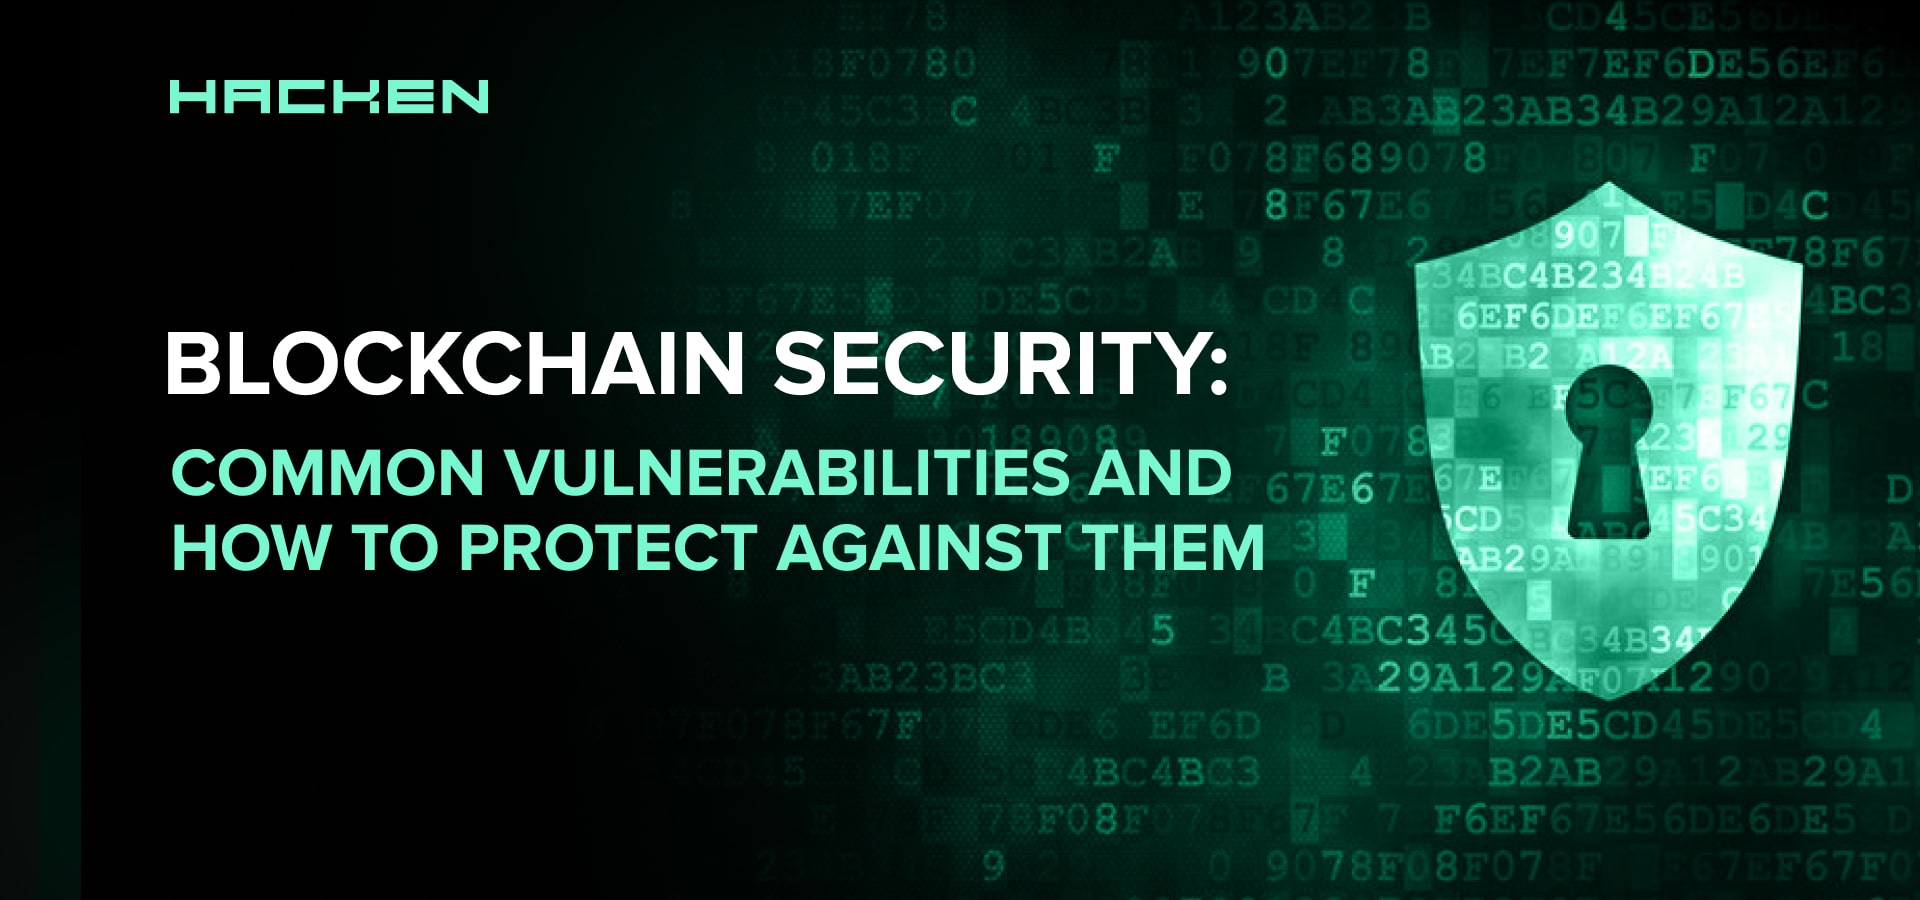 Blockchain Security: Common Vulnerabilities and How to Protect Against Them